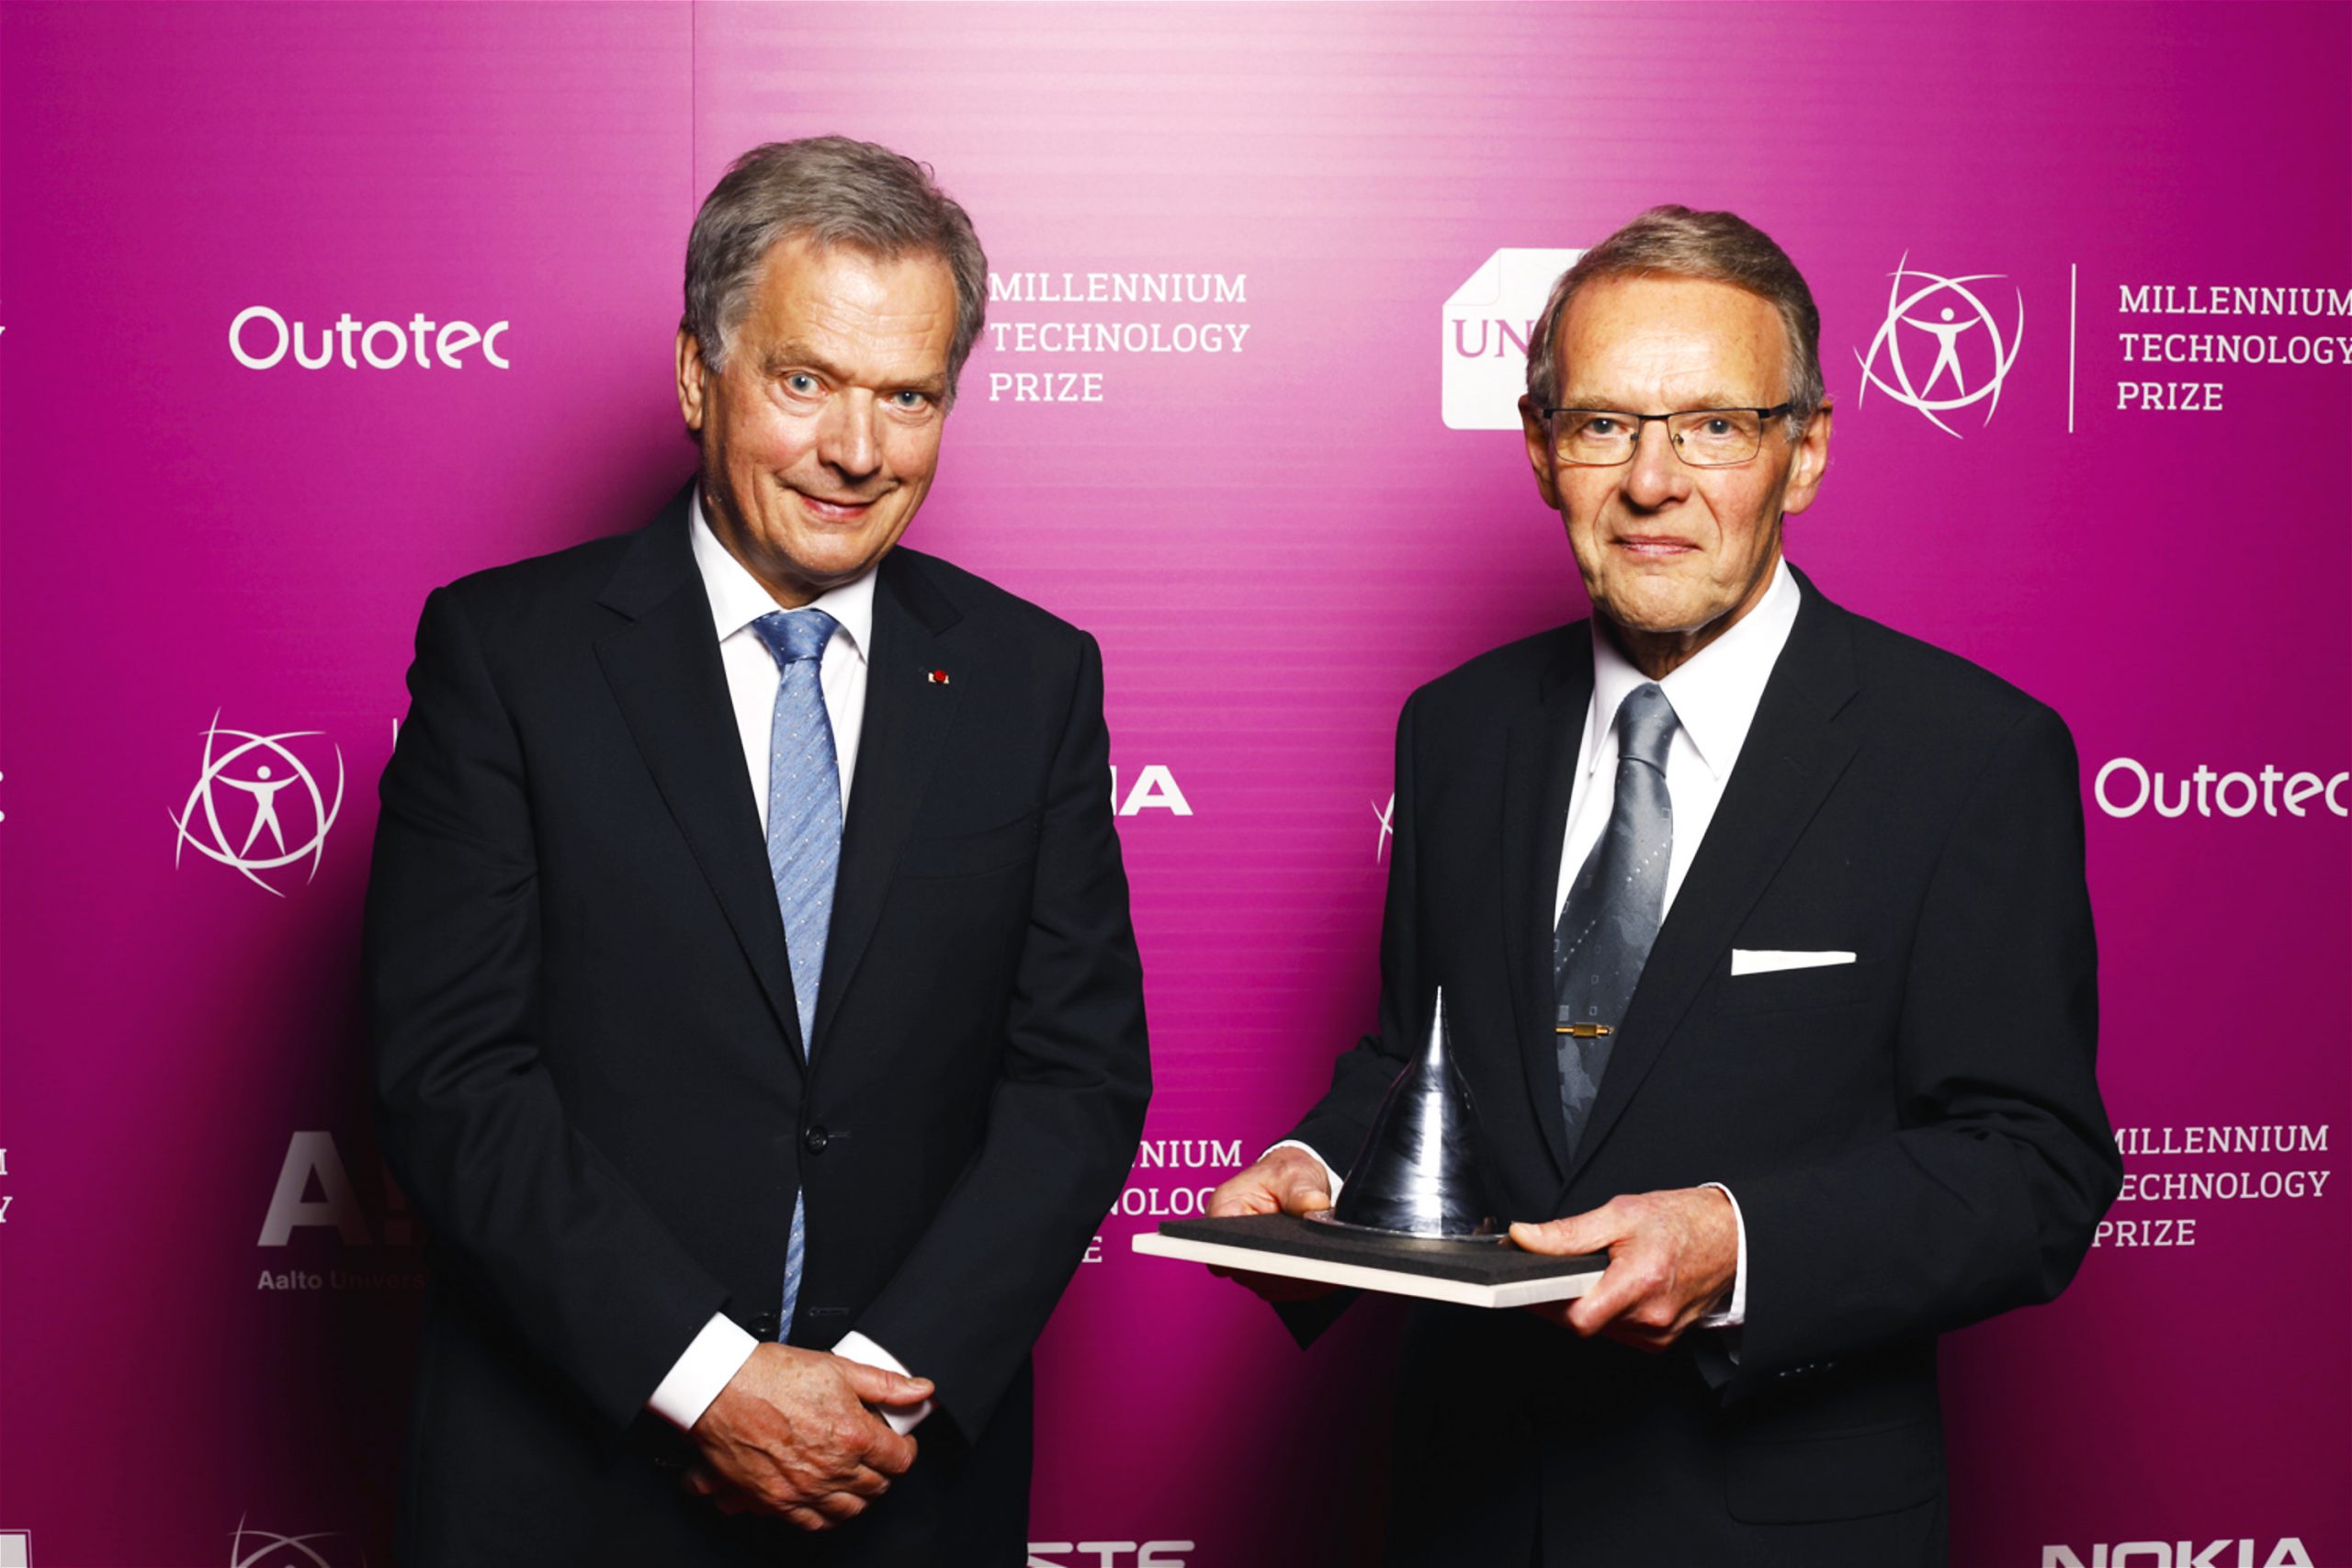 In this picture Tuomo Suntola receives 2018 Millennium Prize from president Sauli Niinistö from his innovation ALD